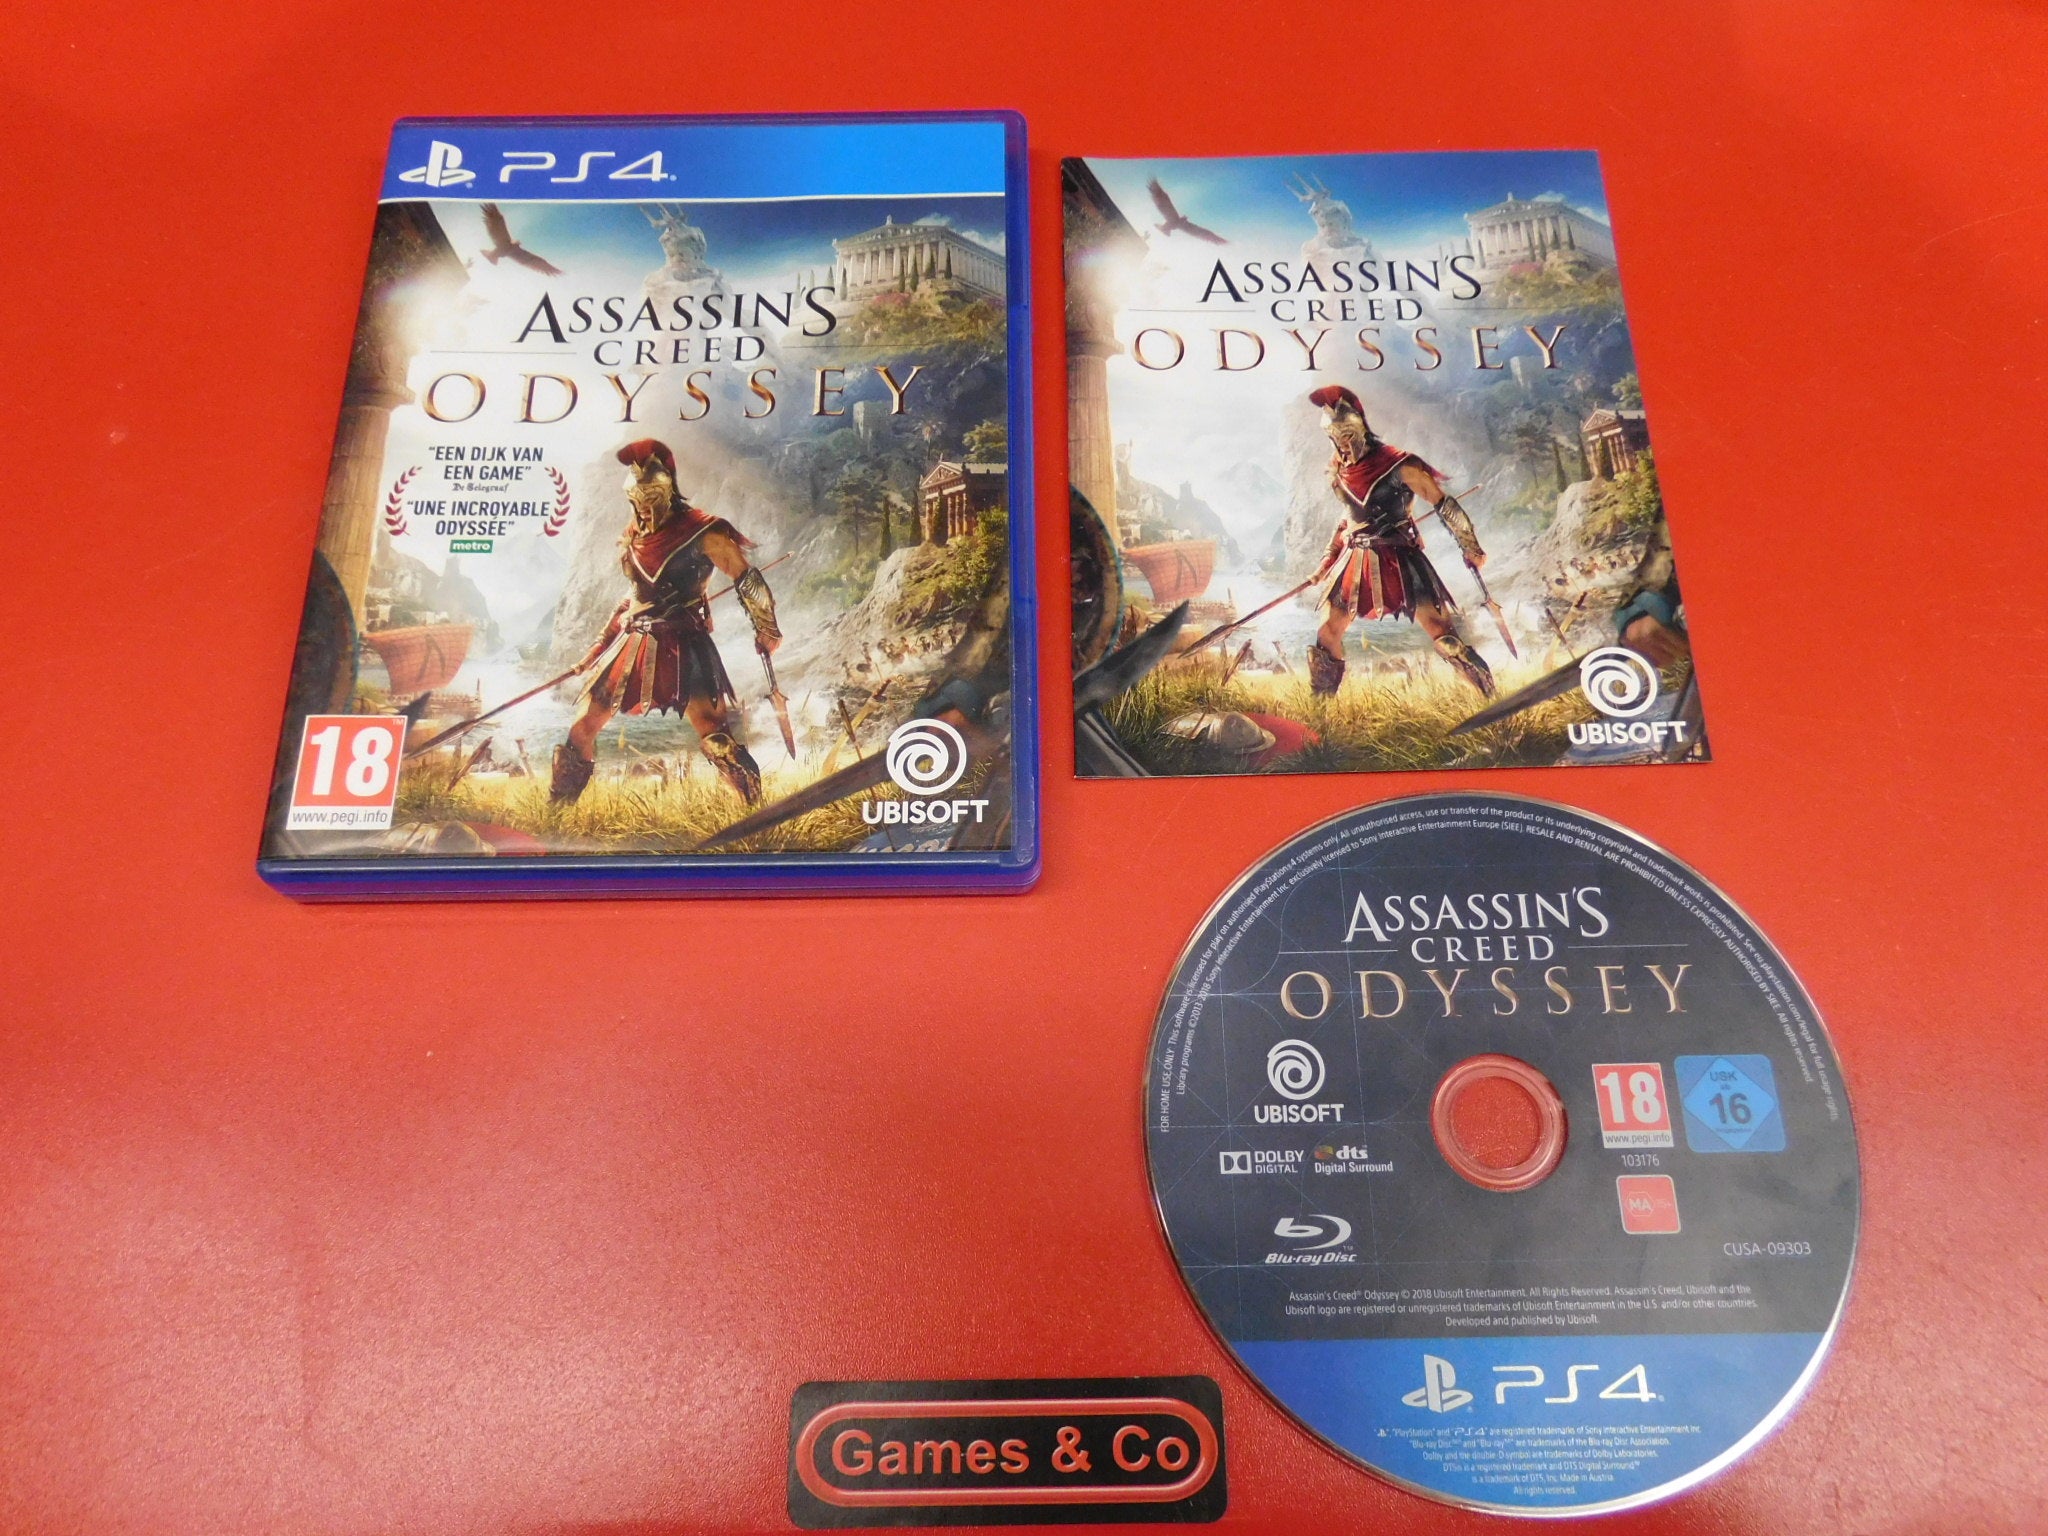 ASSASSIN'S CREED ODYSSEY